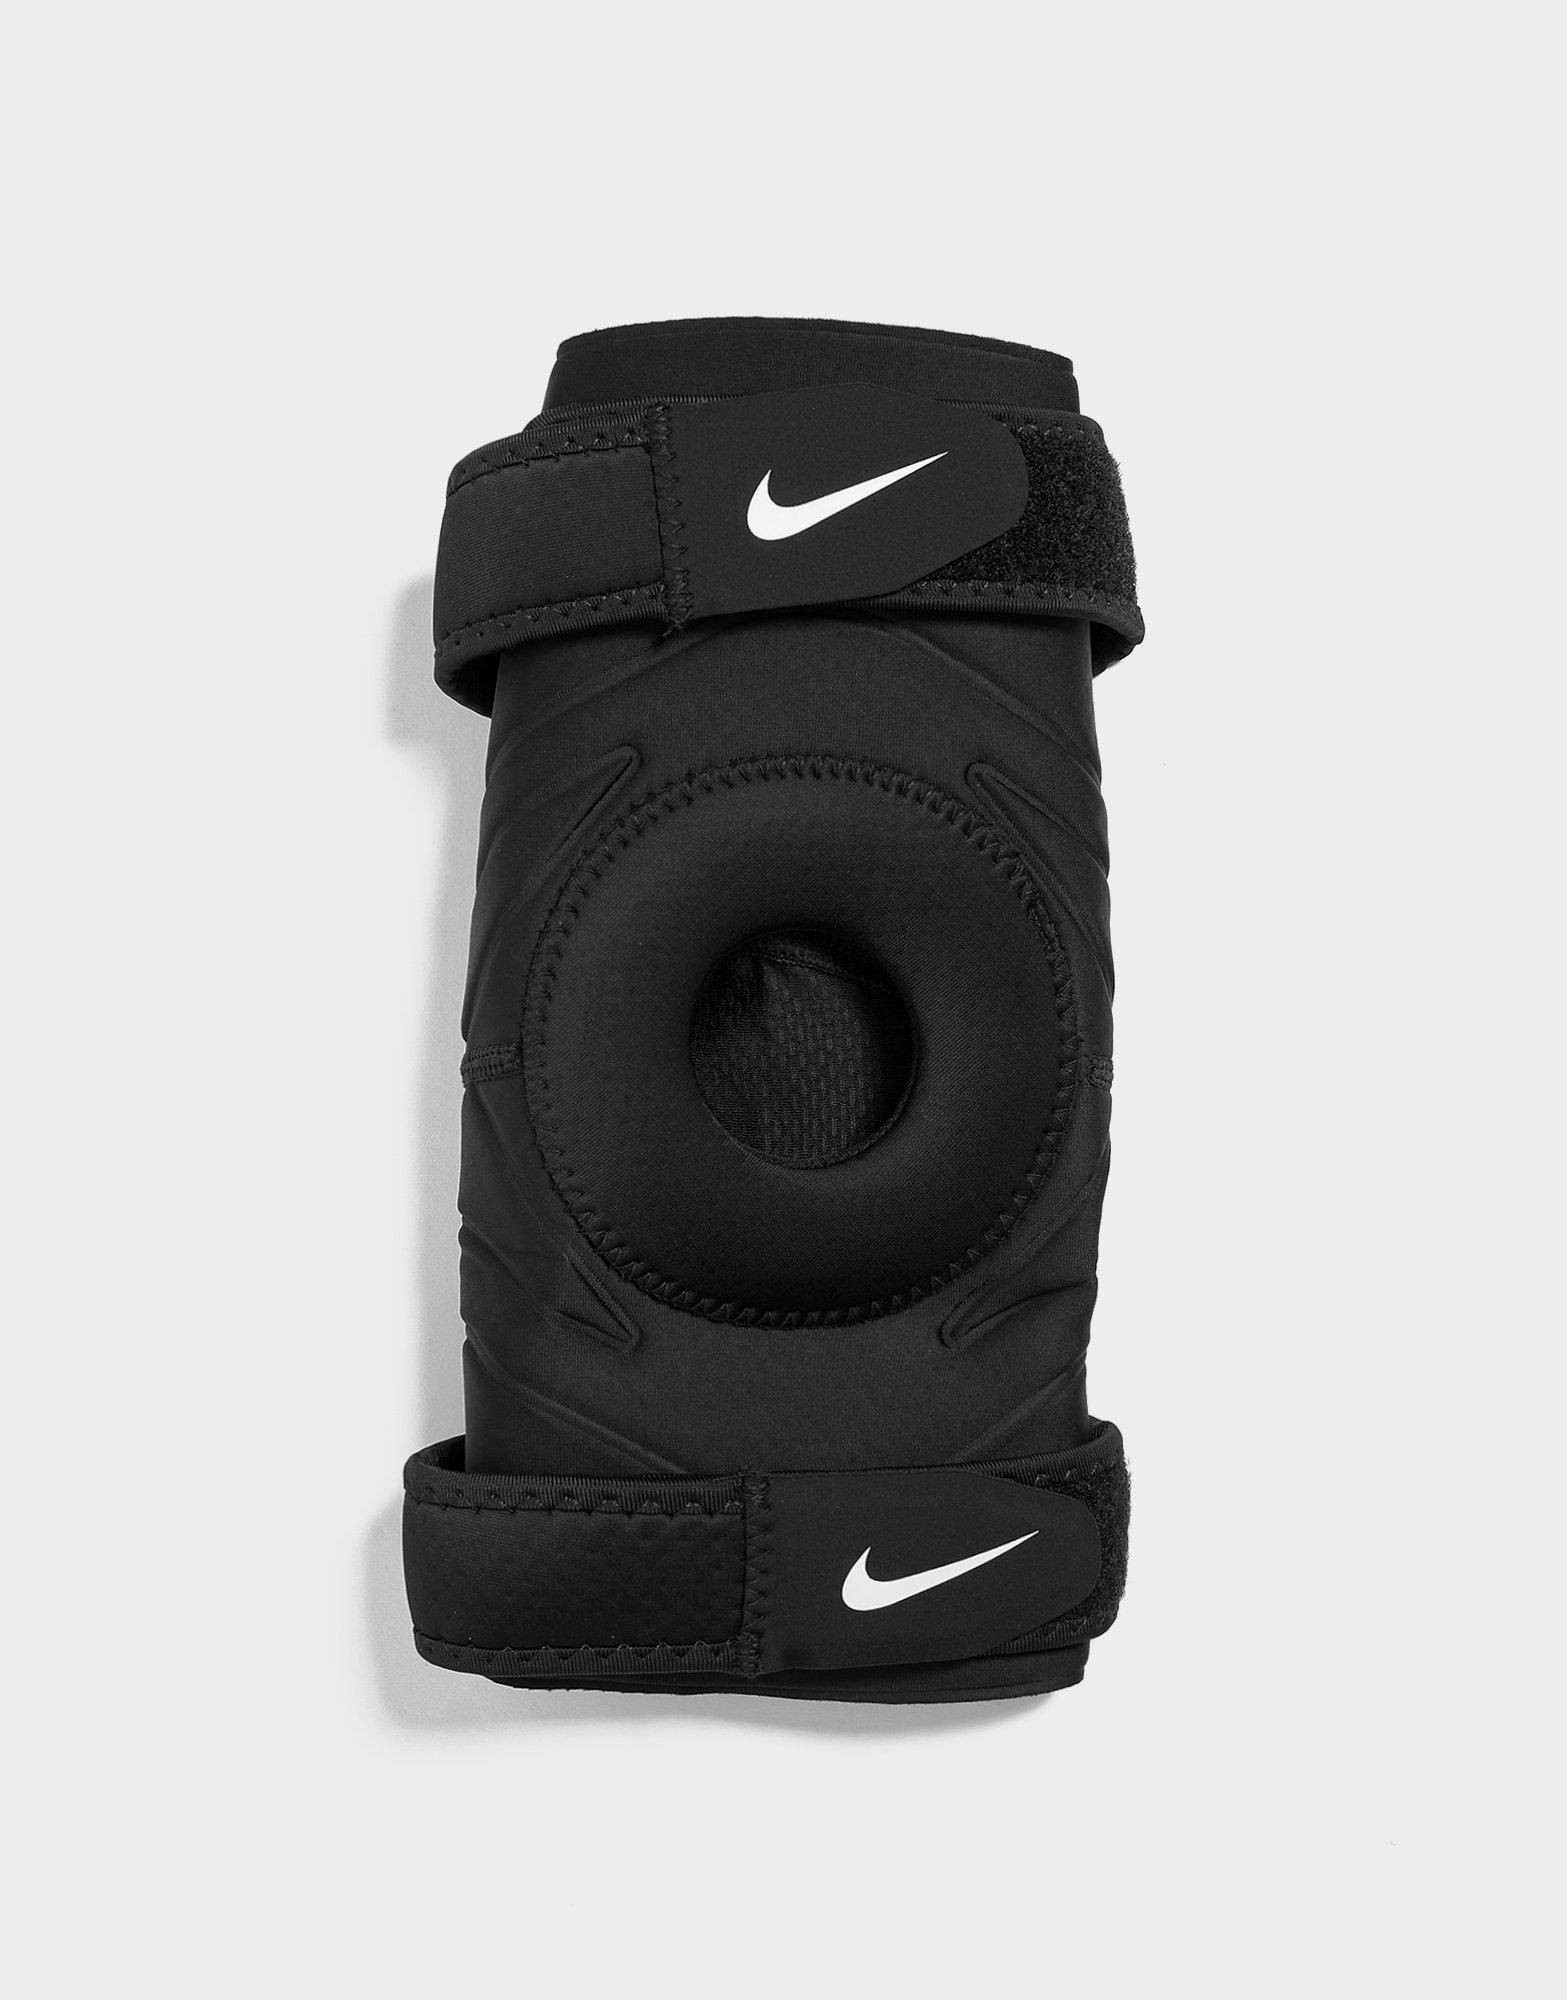 nike pro open knee sleeve with strap